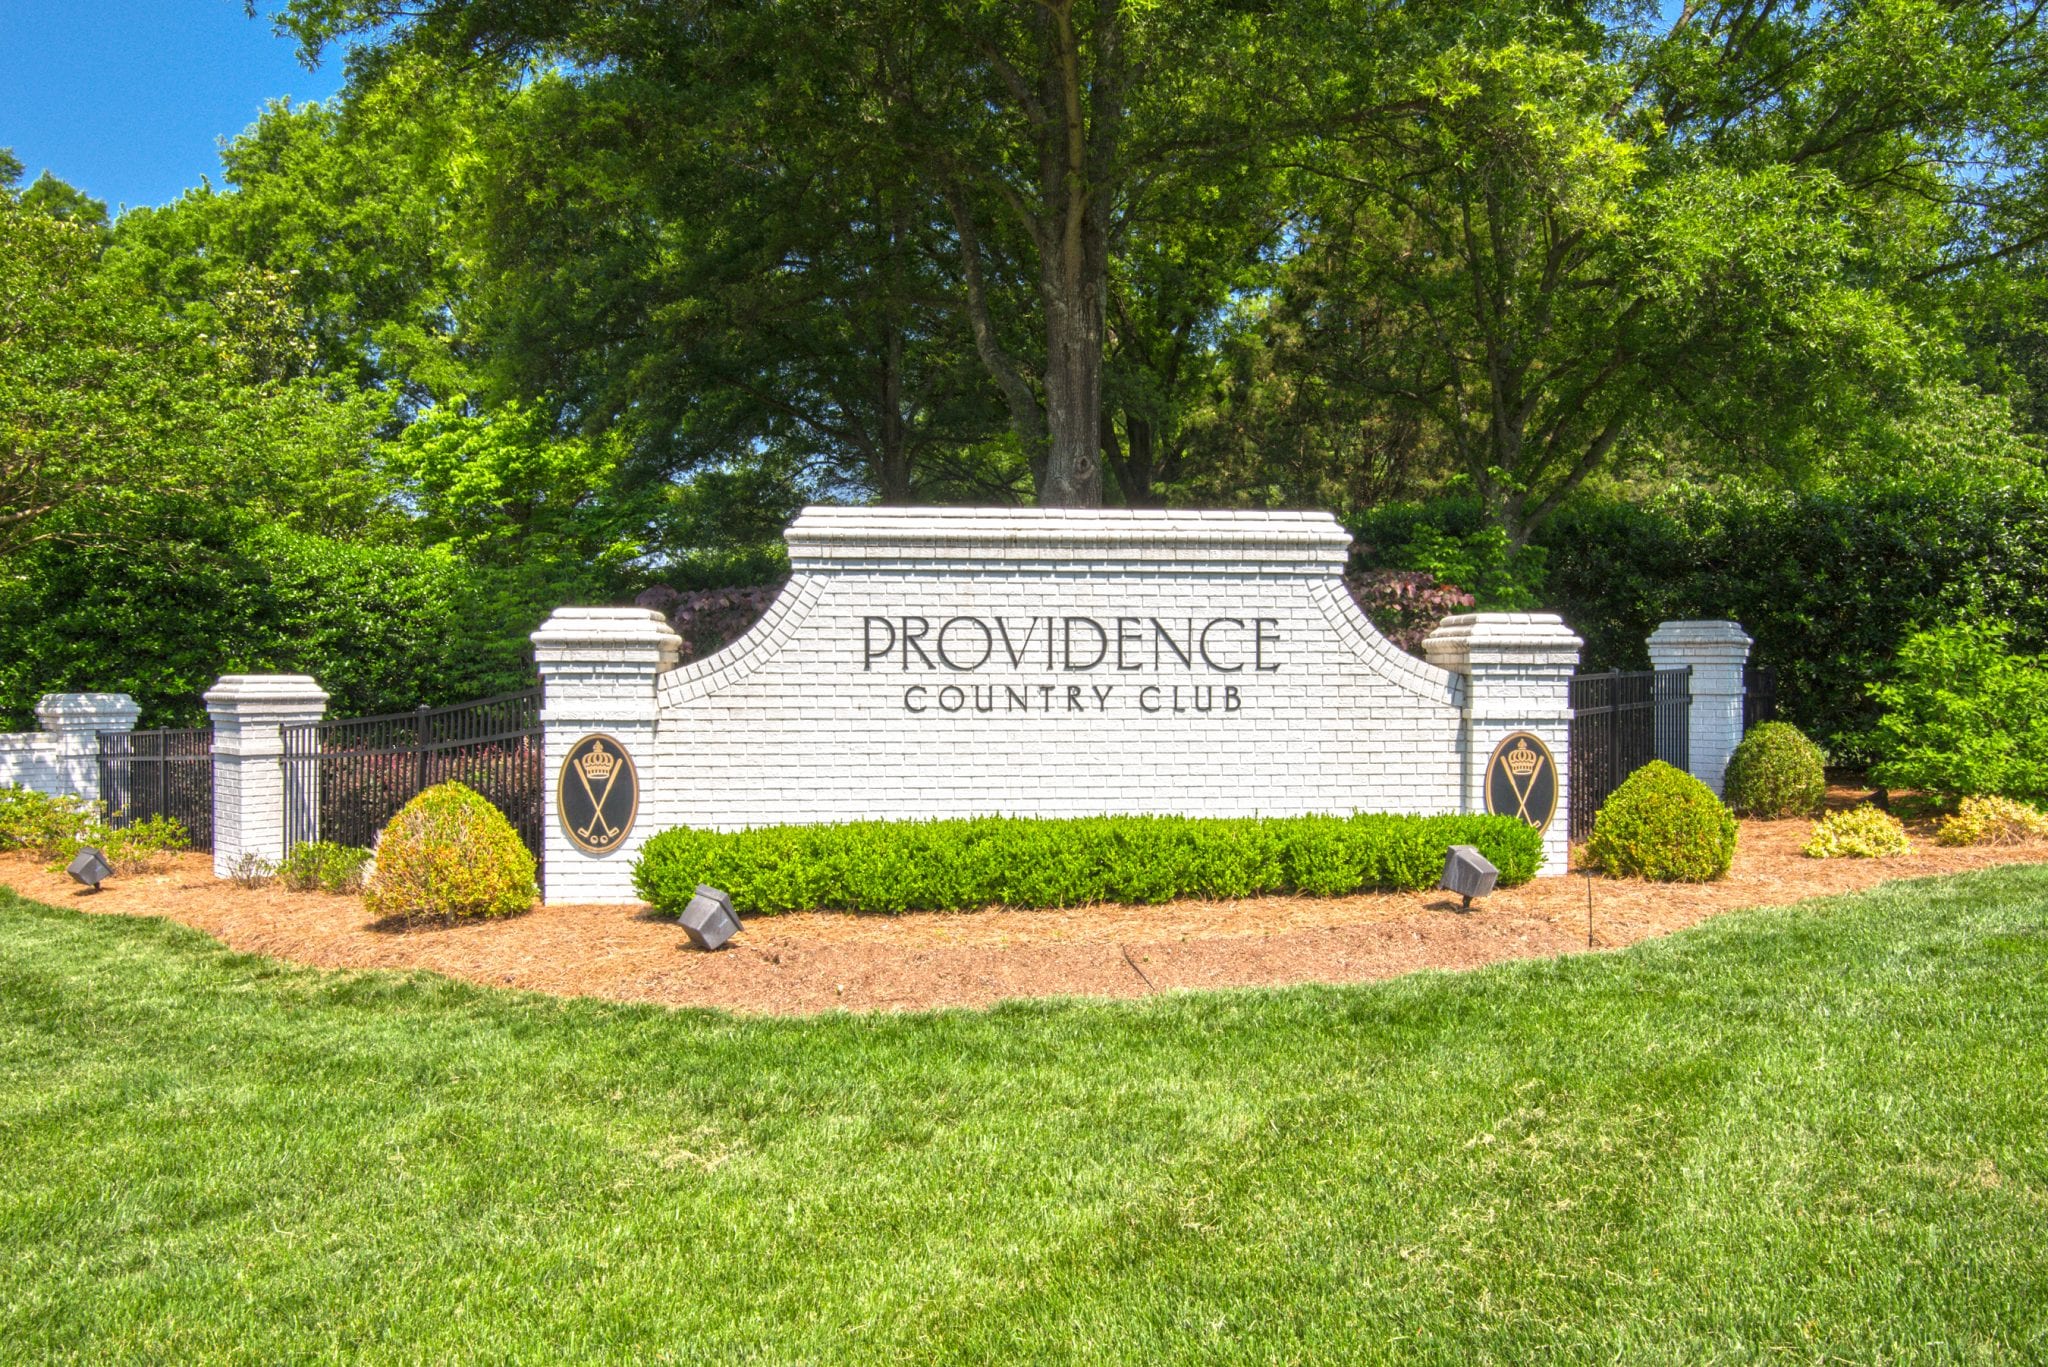 Providence Country Club